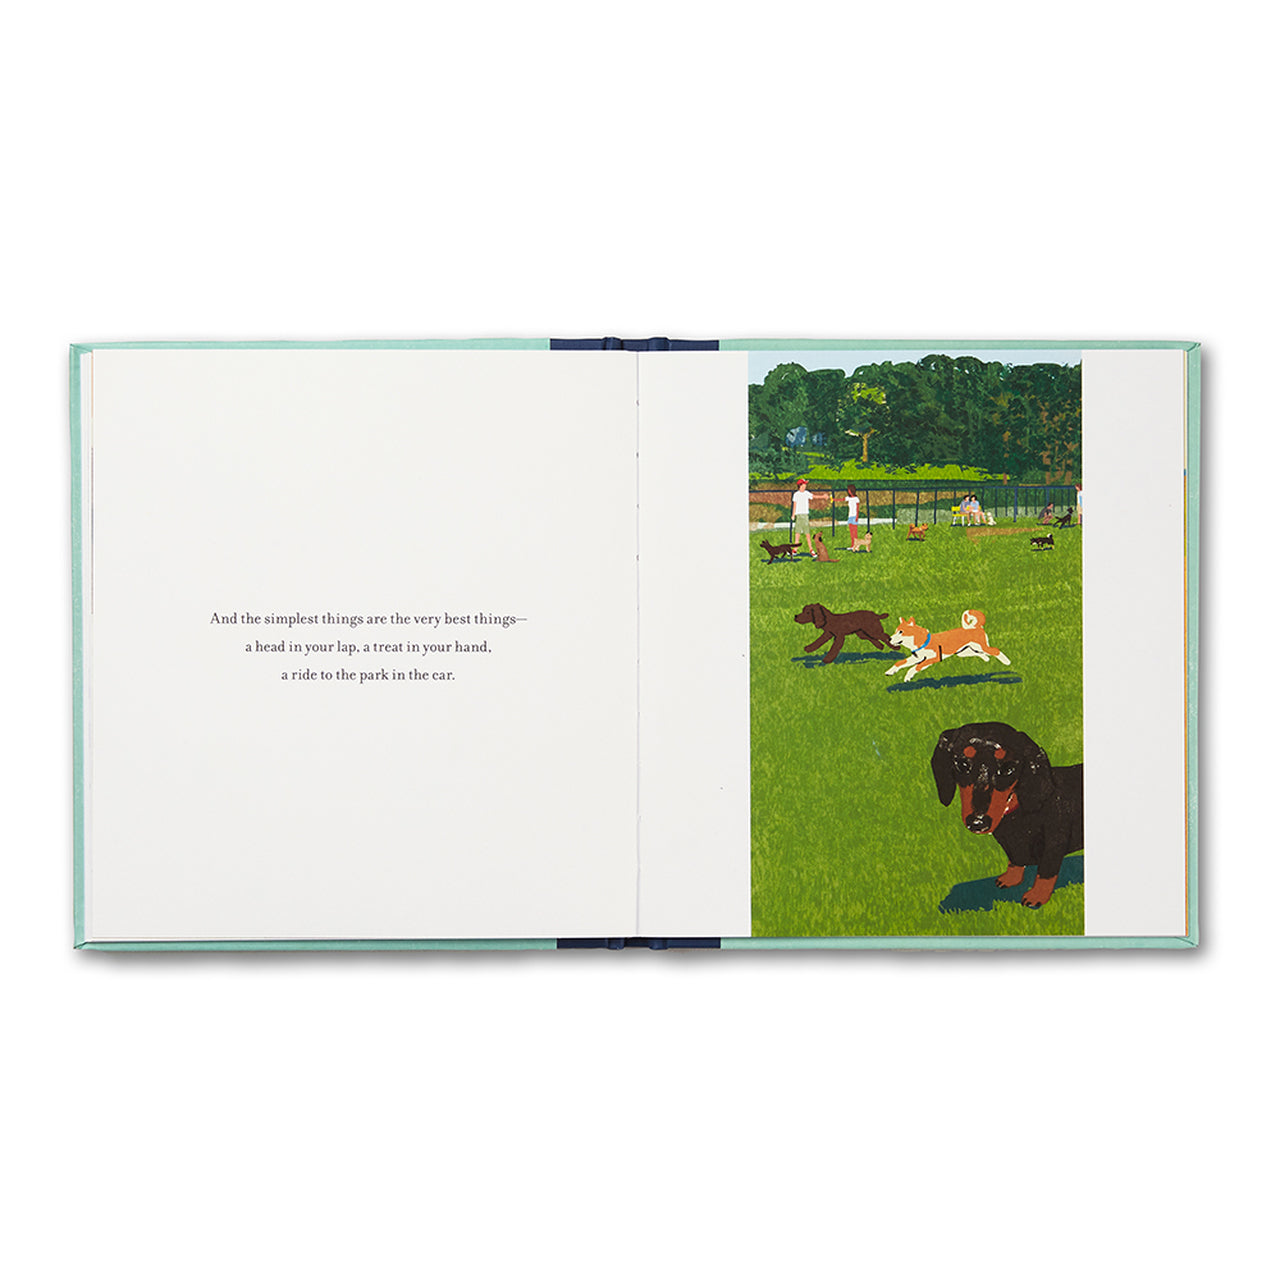 When You Love a Dog - A quote book by Compendium